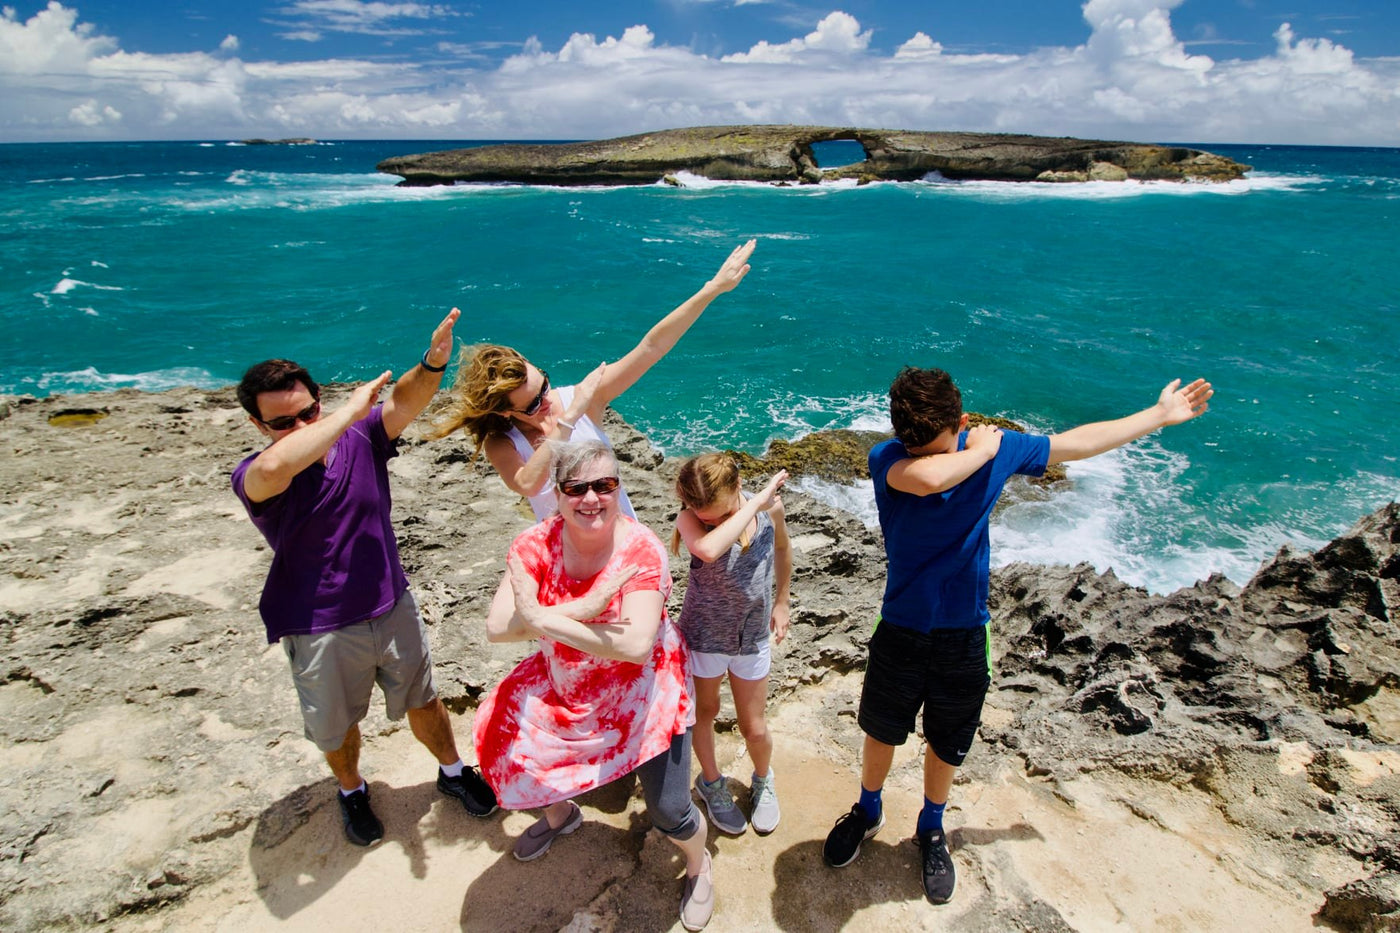 Best Custom Oahu Island tour for families with seniors and kids